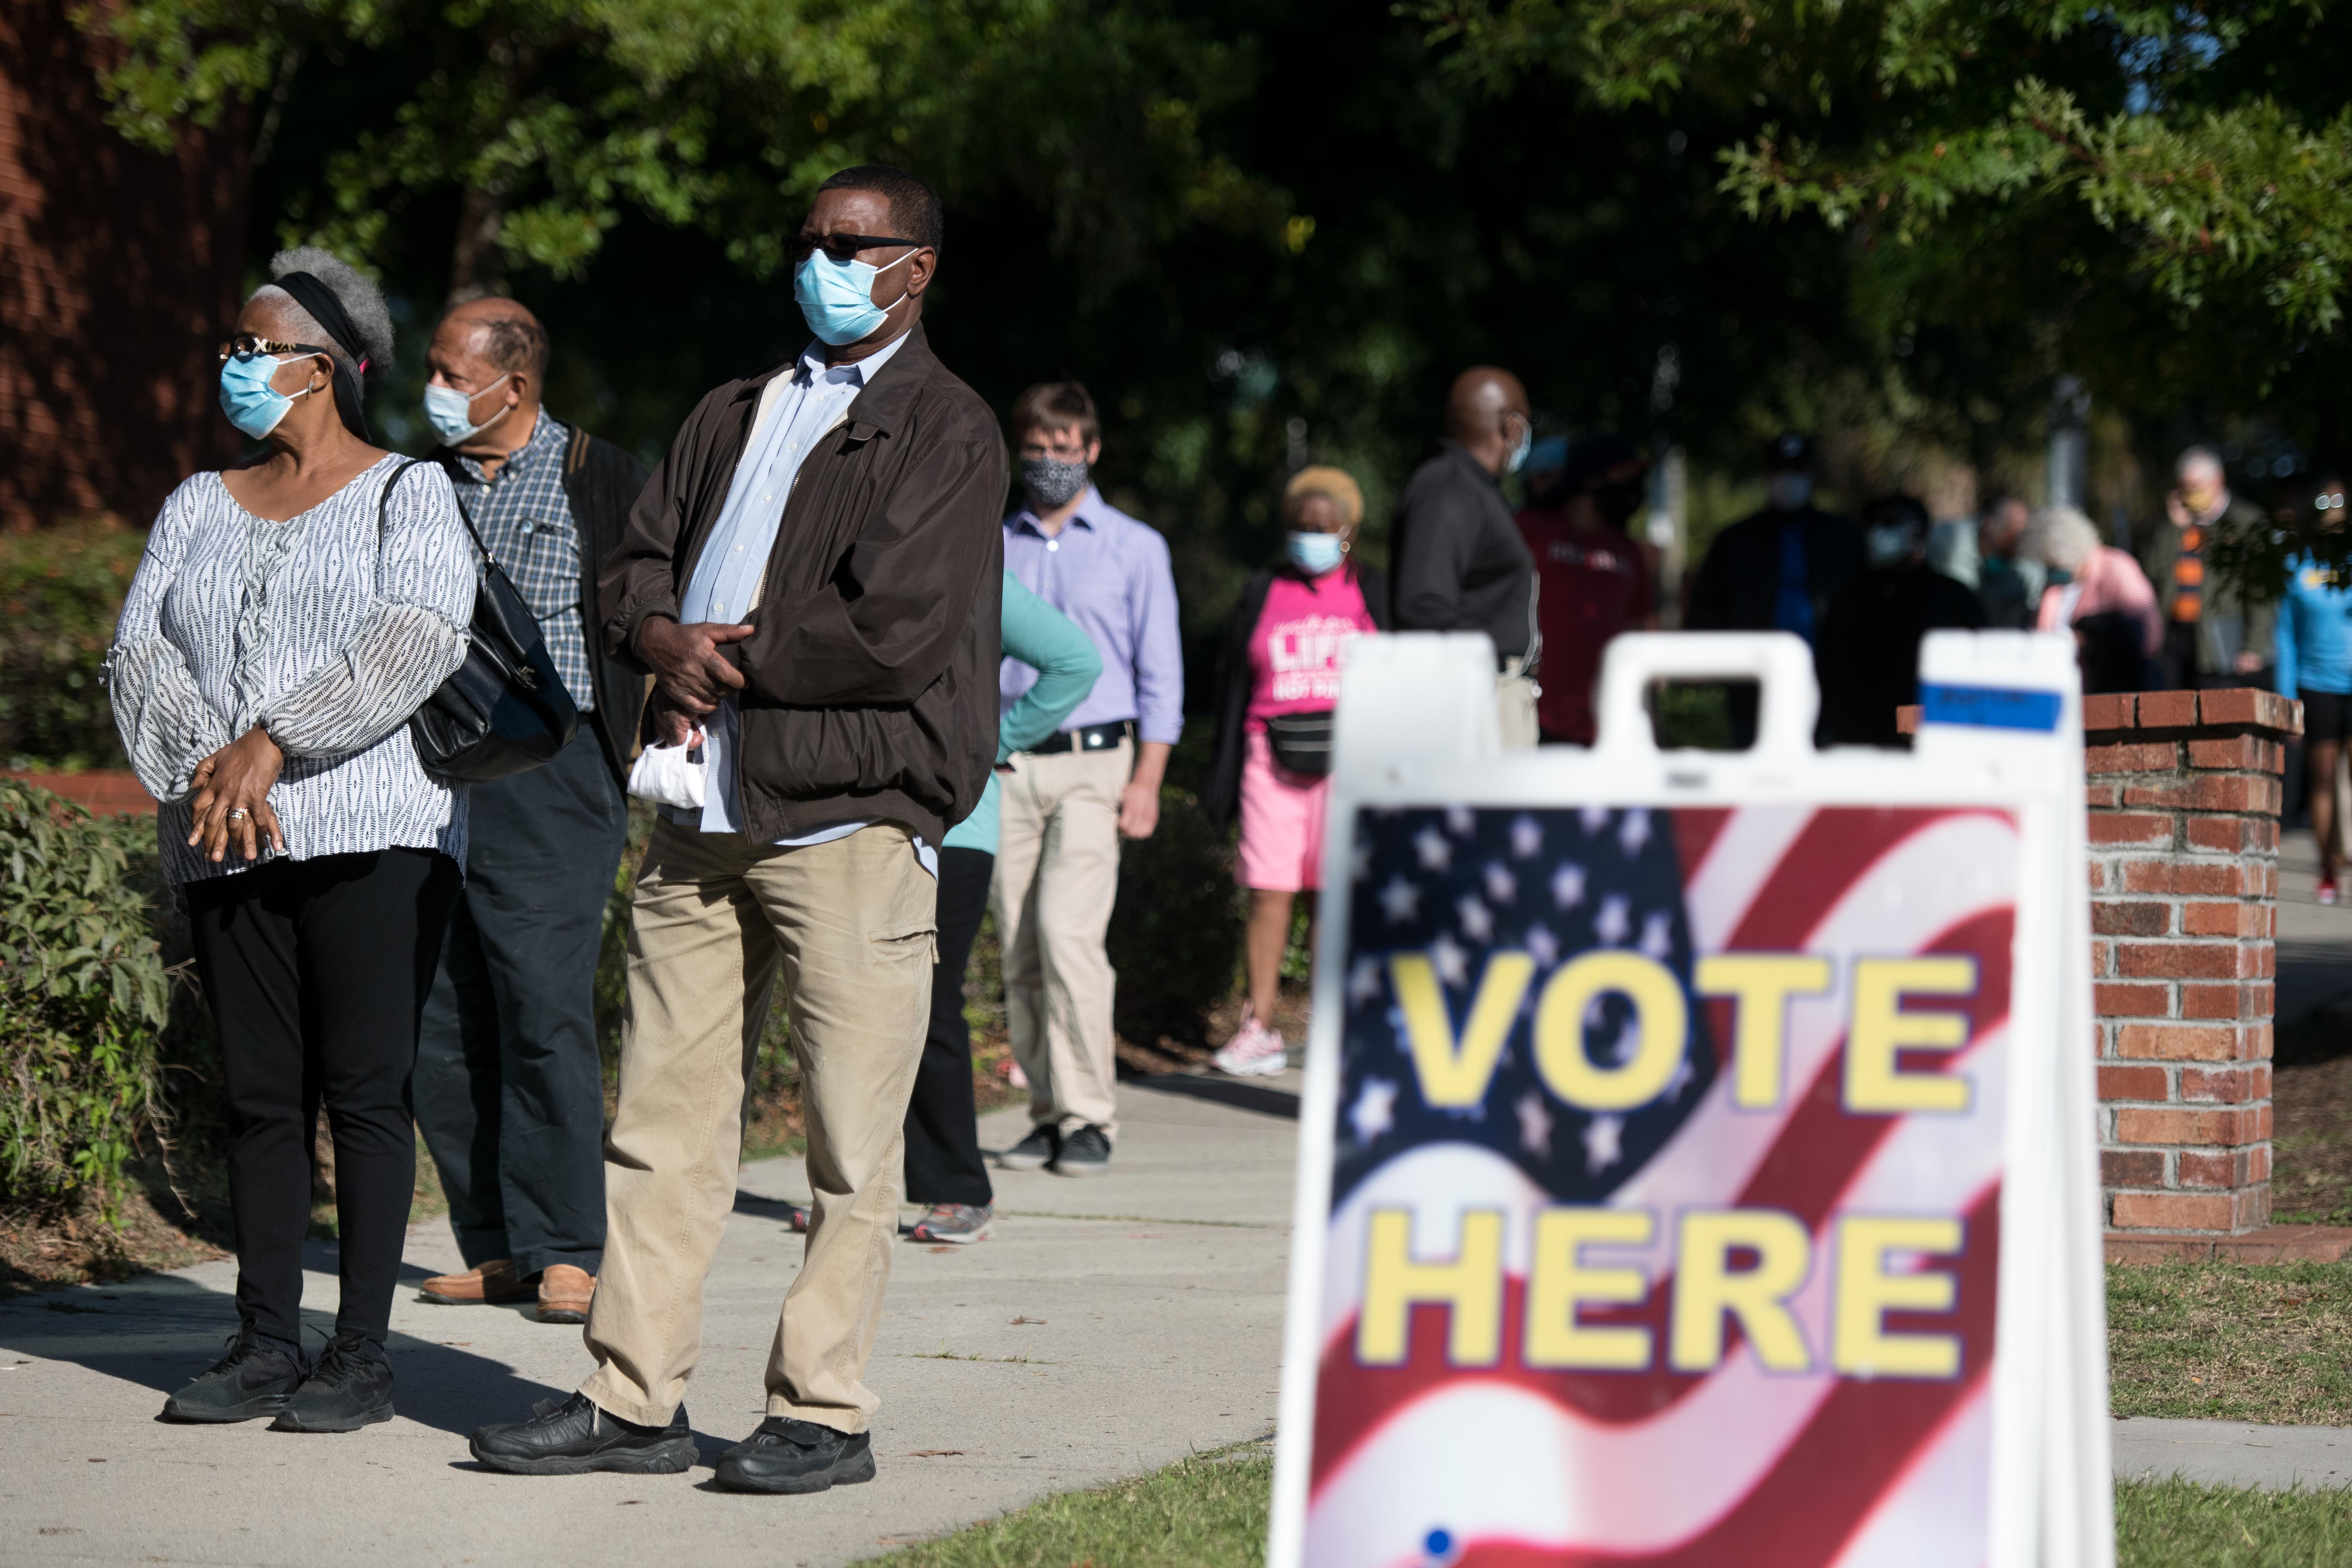 A group of voters wearing masks waits outside a polling place. A "Vote Here" sign can be seen.